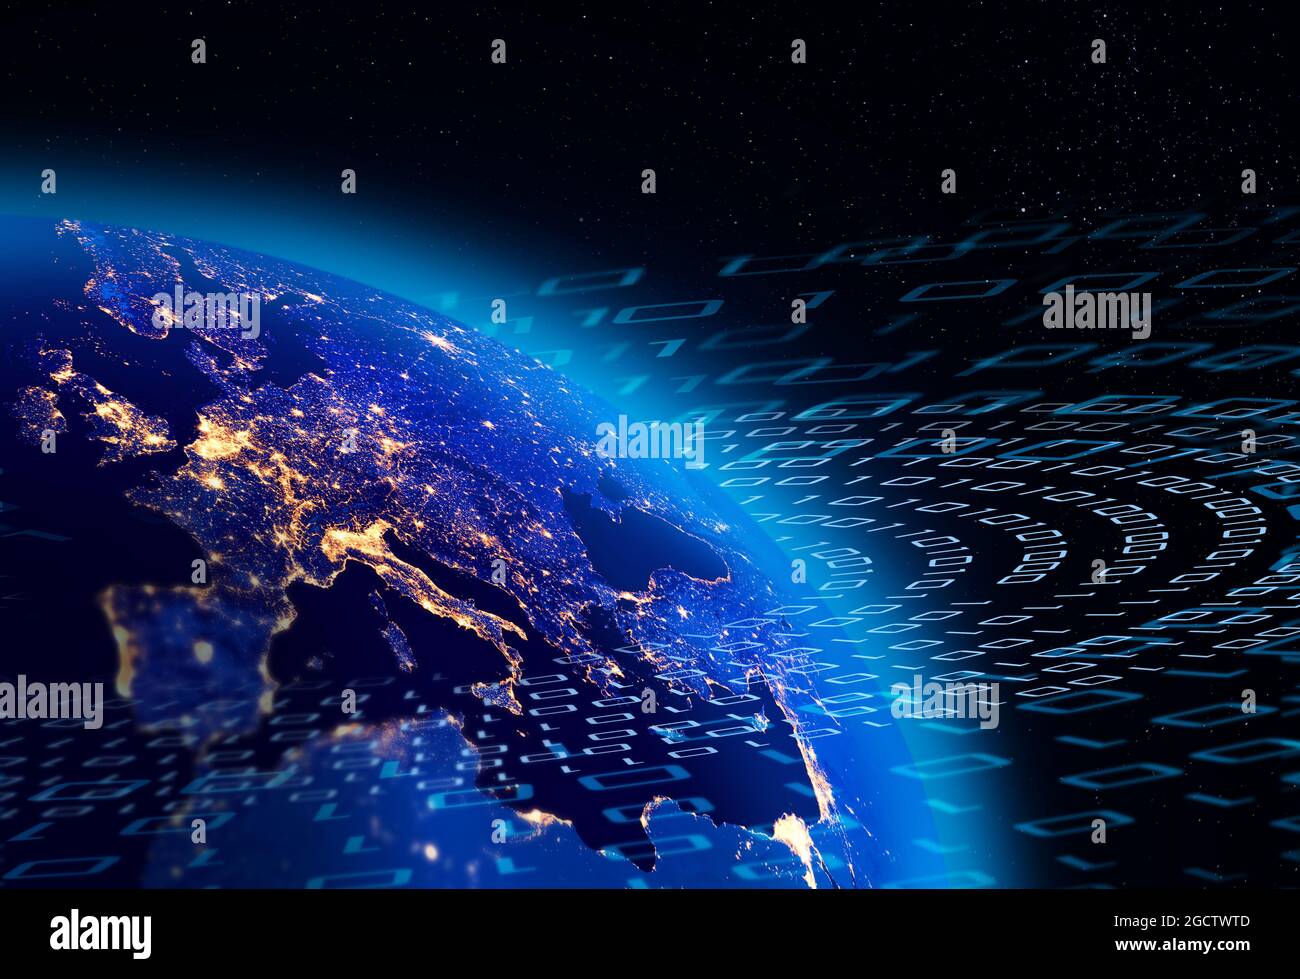 Binary data flow around Planet Earth, European city lights visible. Digital communication concept. Some elements of the image furnished by NASA. Stock Photo